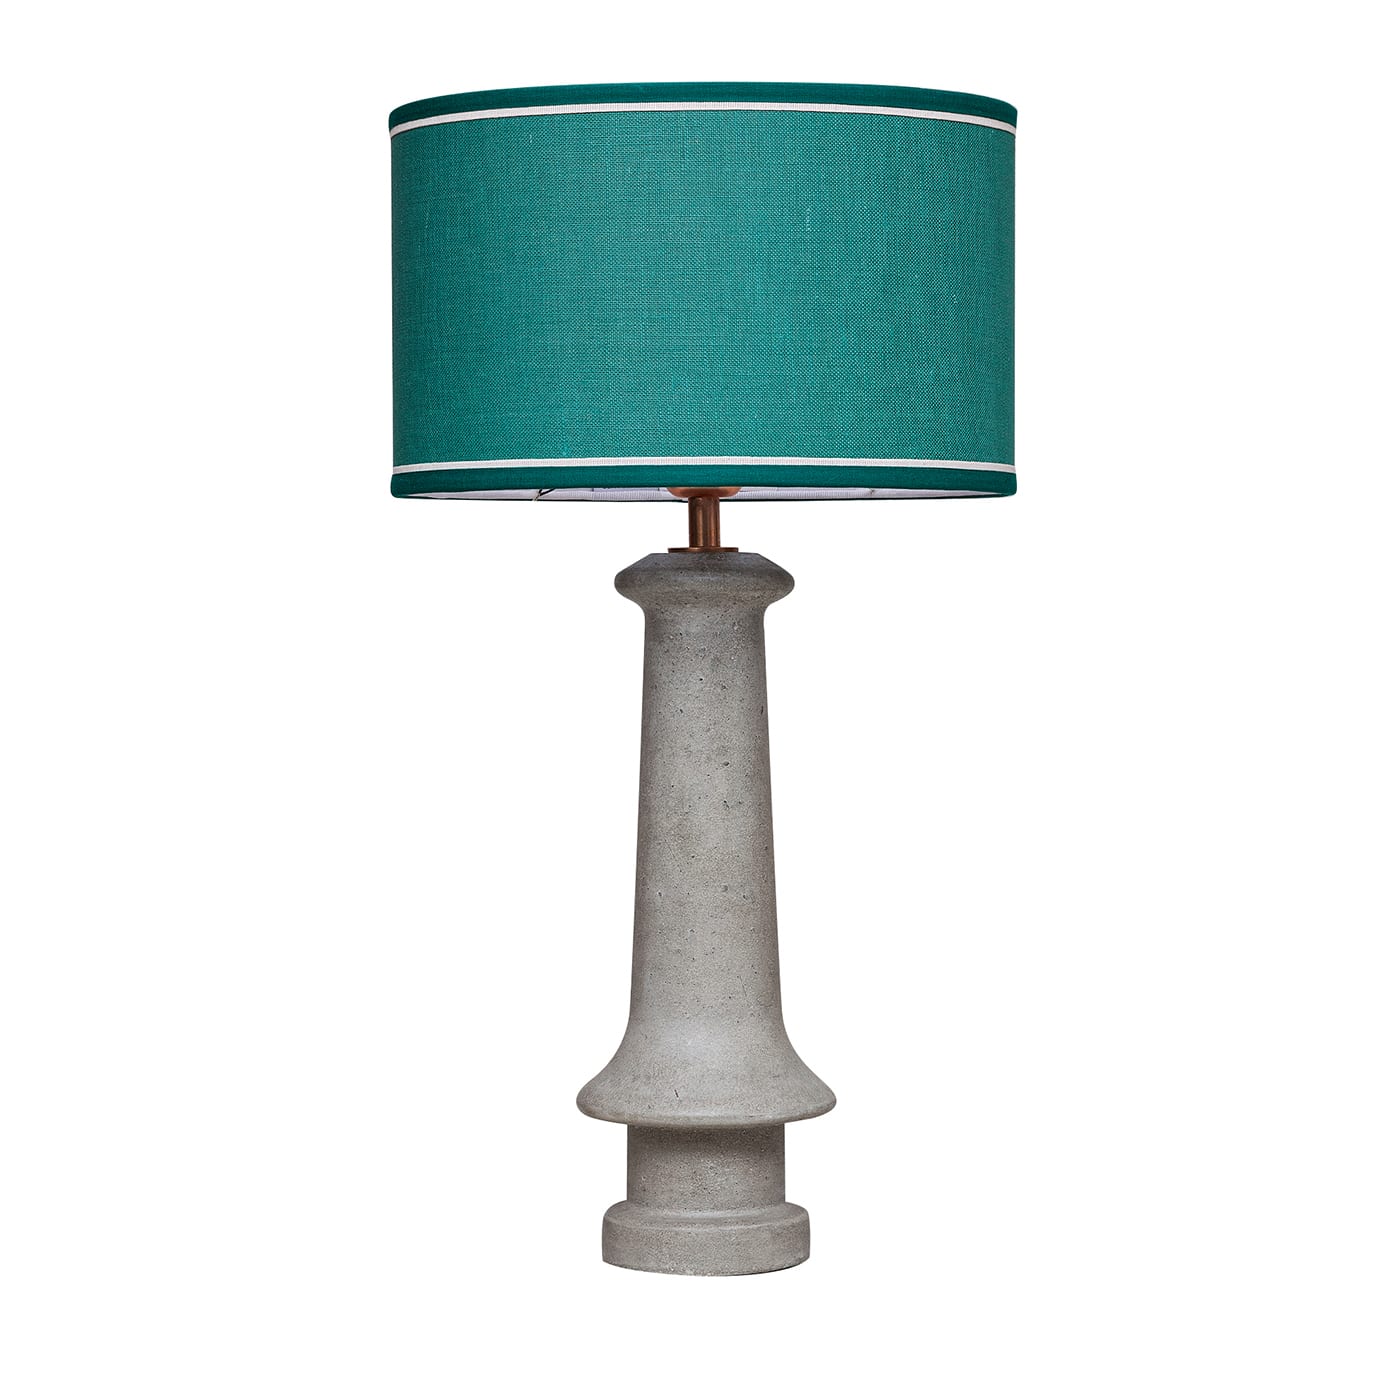 Cement Turquoise Table Lamp - Servomuto